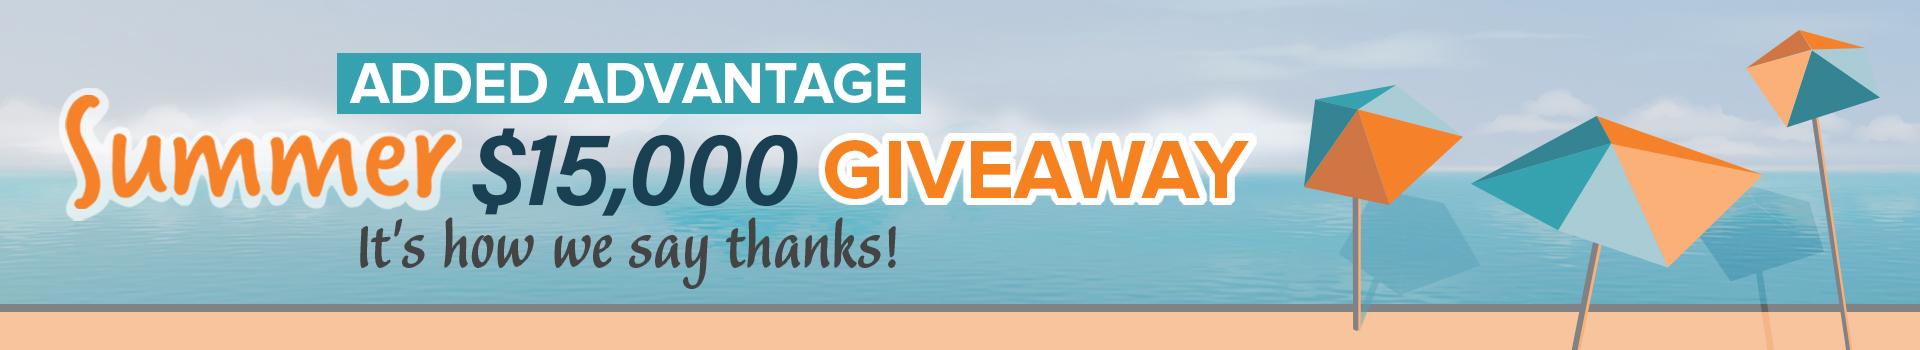 Graphic of a beach landscape with three blue and orange umbrellas. Text reads "Added Advantage Summer $15,000 Giveaway: It's How We Say Thanks!"